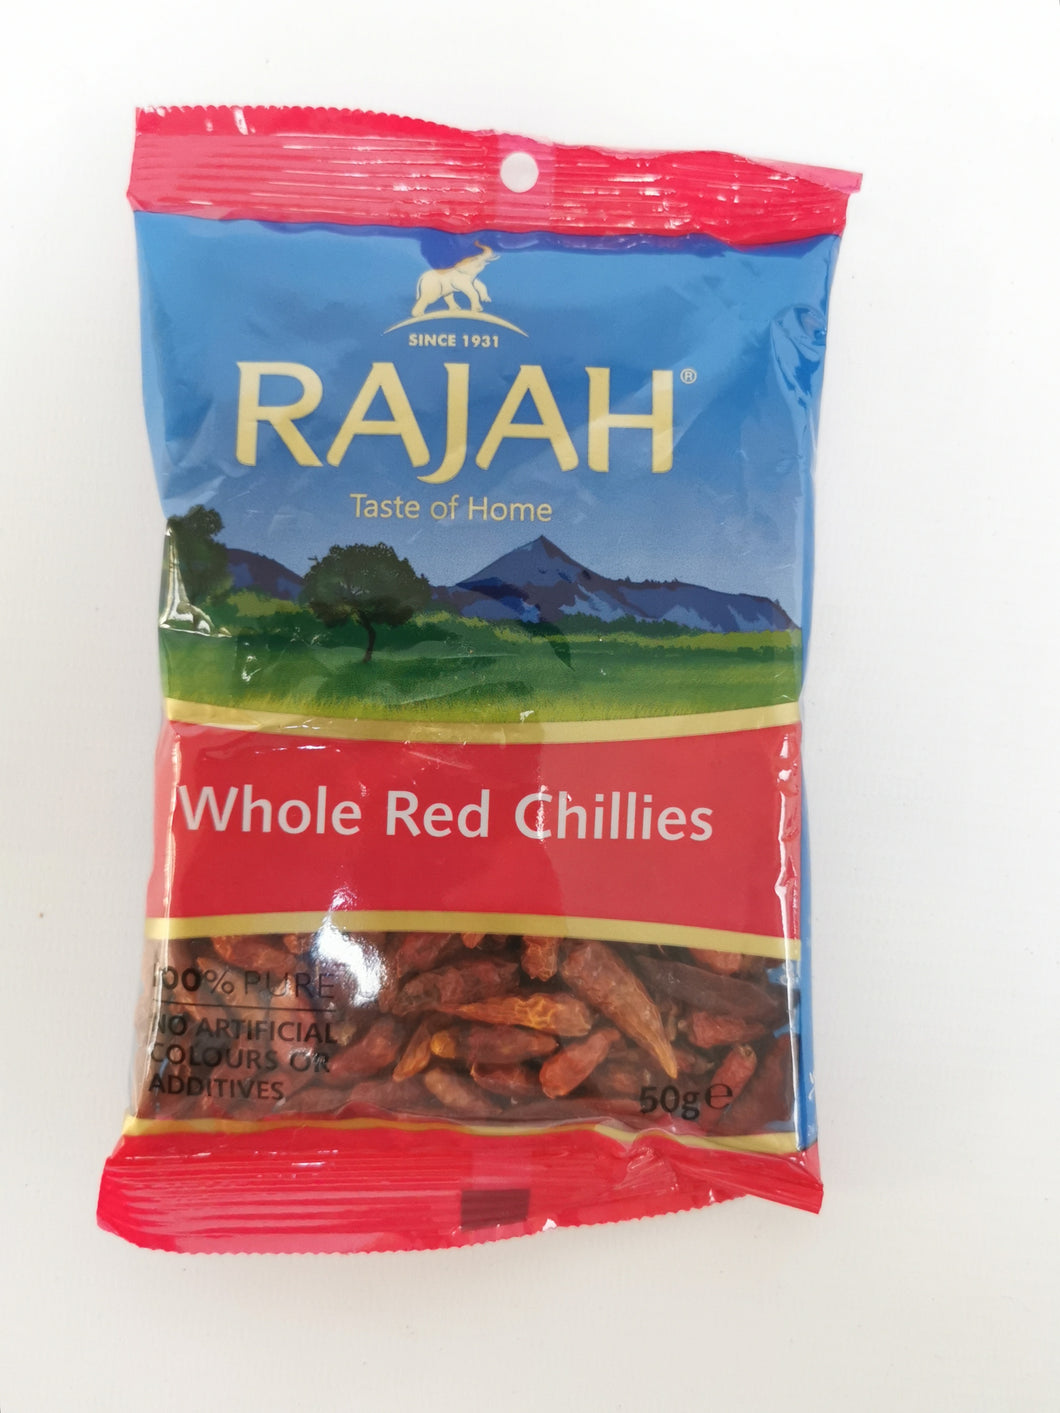 Rajah Whole Red Chillies